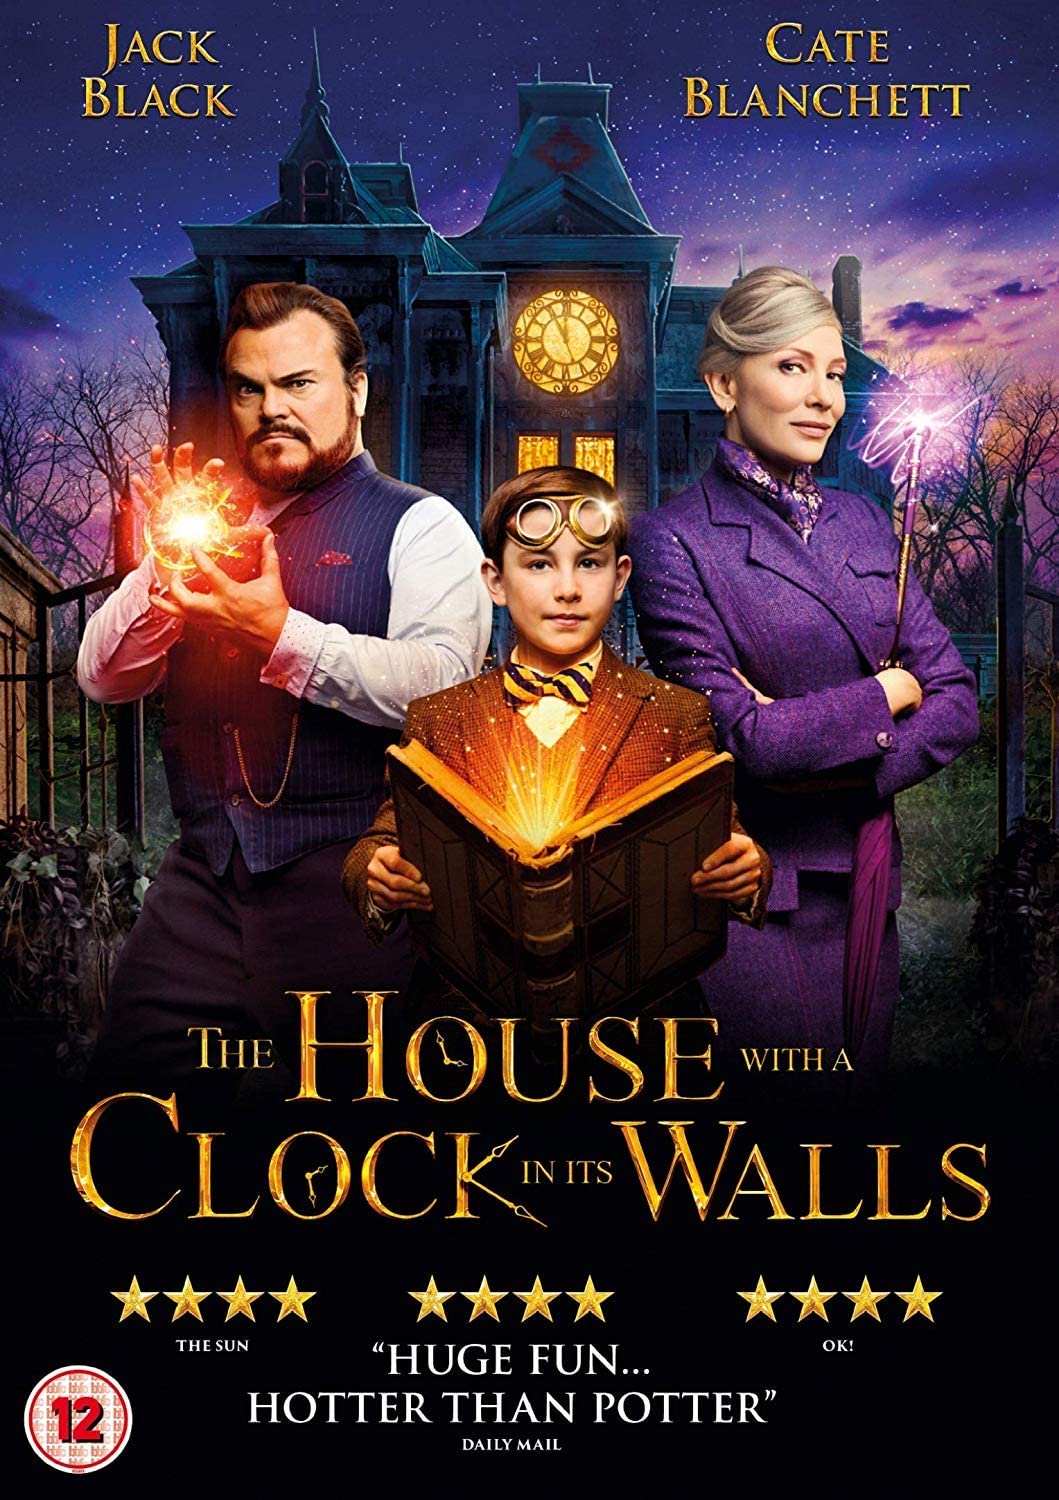 The House with a Clock in its Walls - Fantasy/Family [DVD]